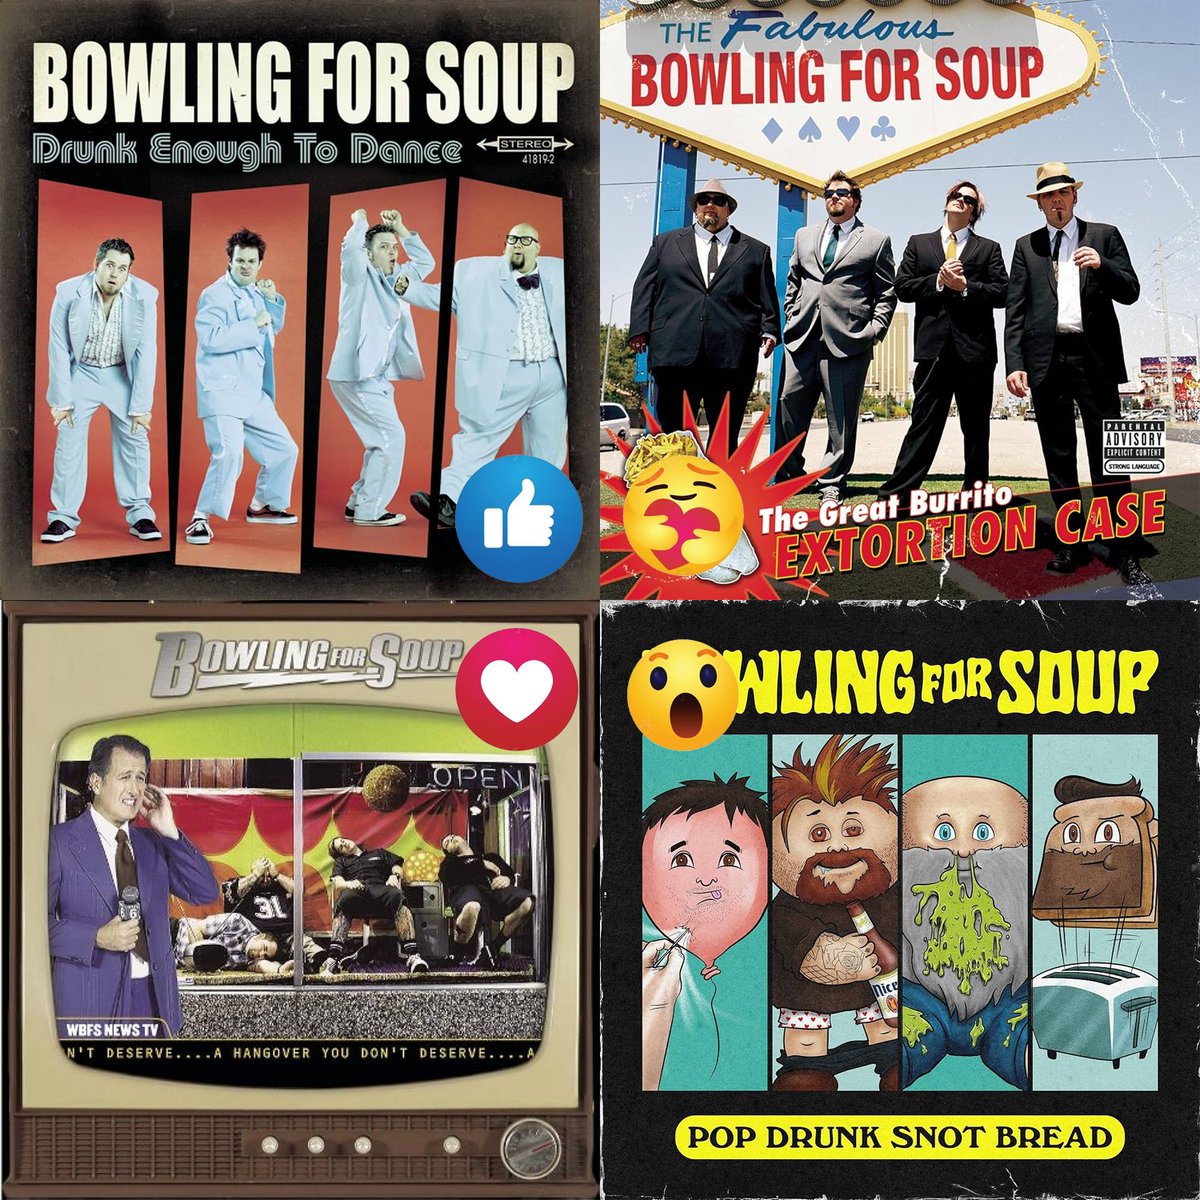 What's your favorite? Let us know!

Will you catching one of our' A Hangover You Don't Deserve' shows?
BowlingForSoup.com